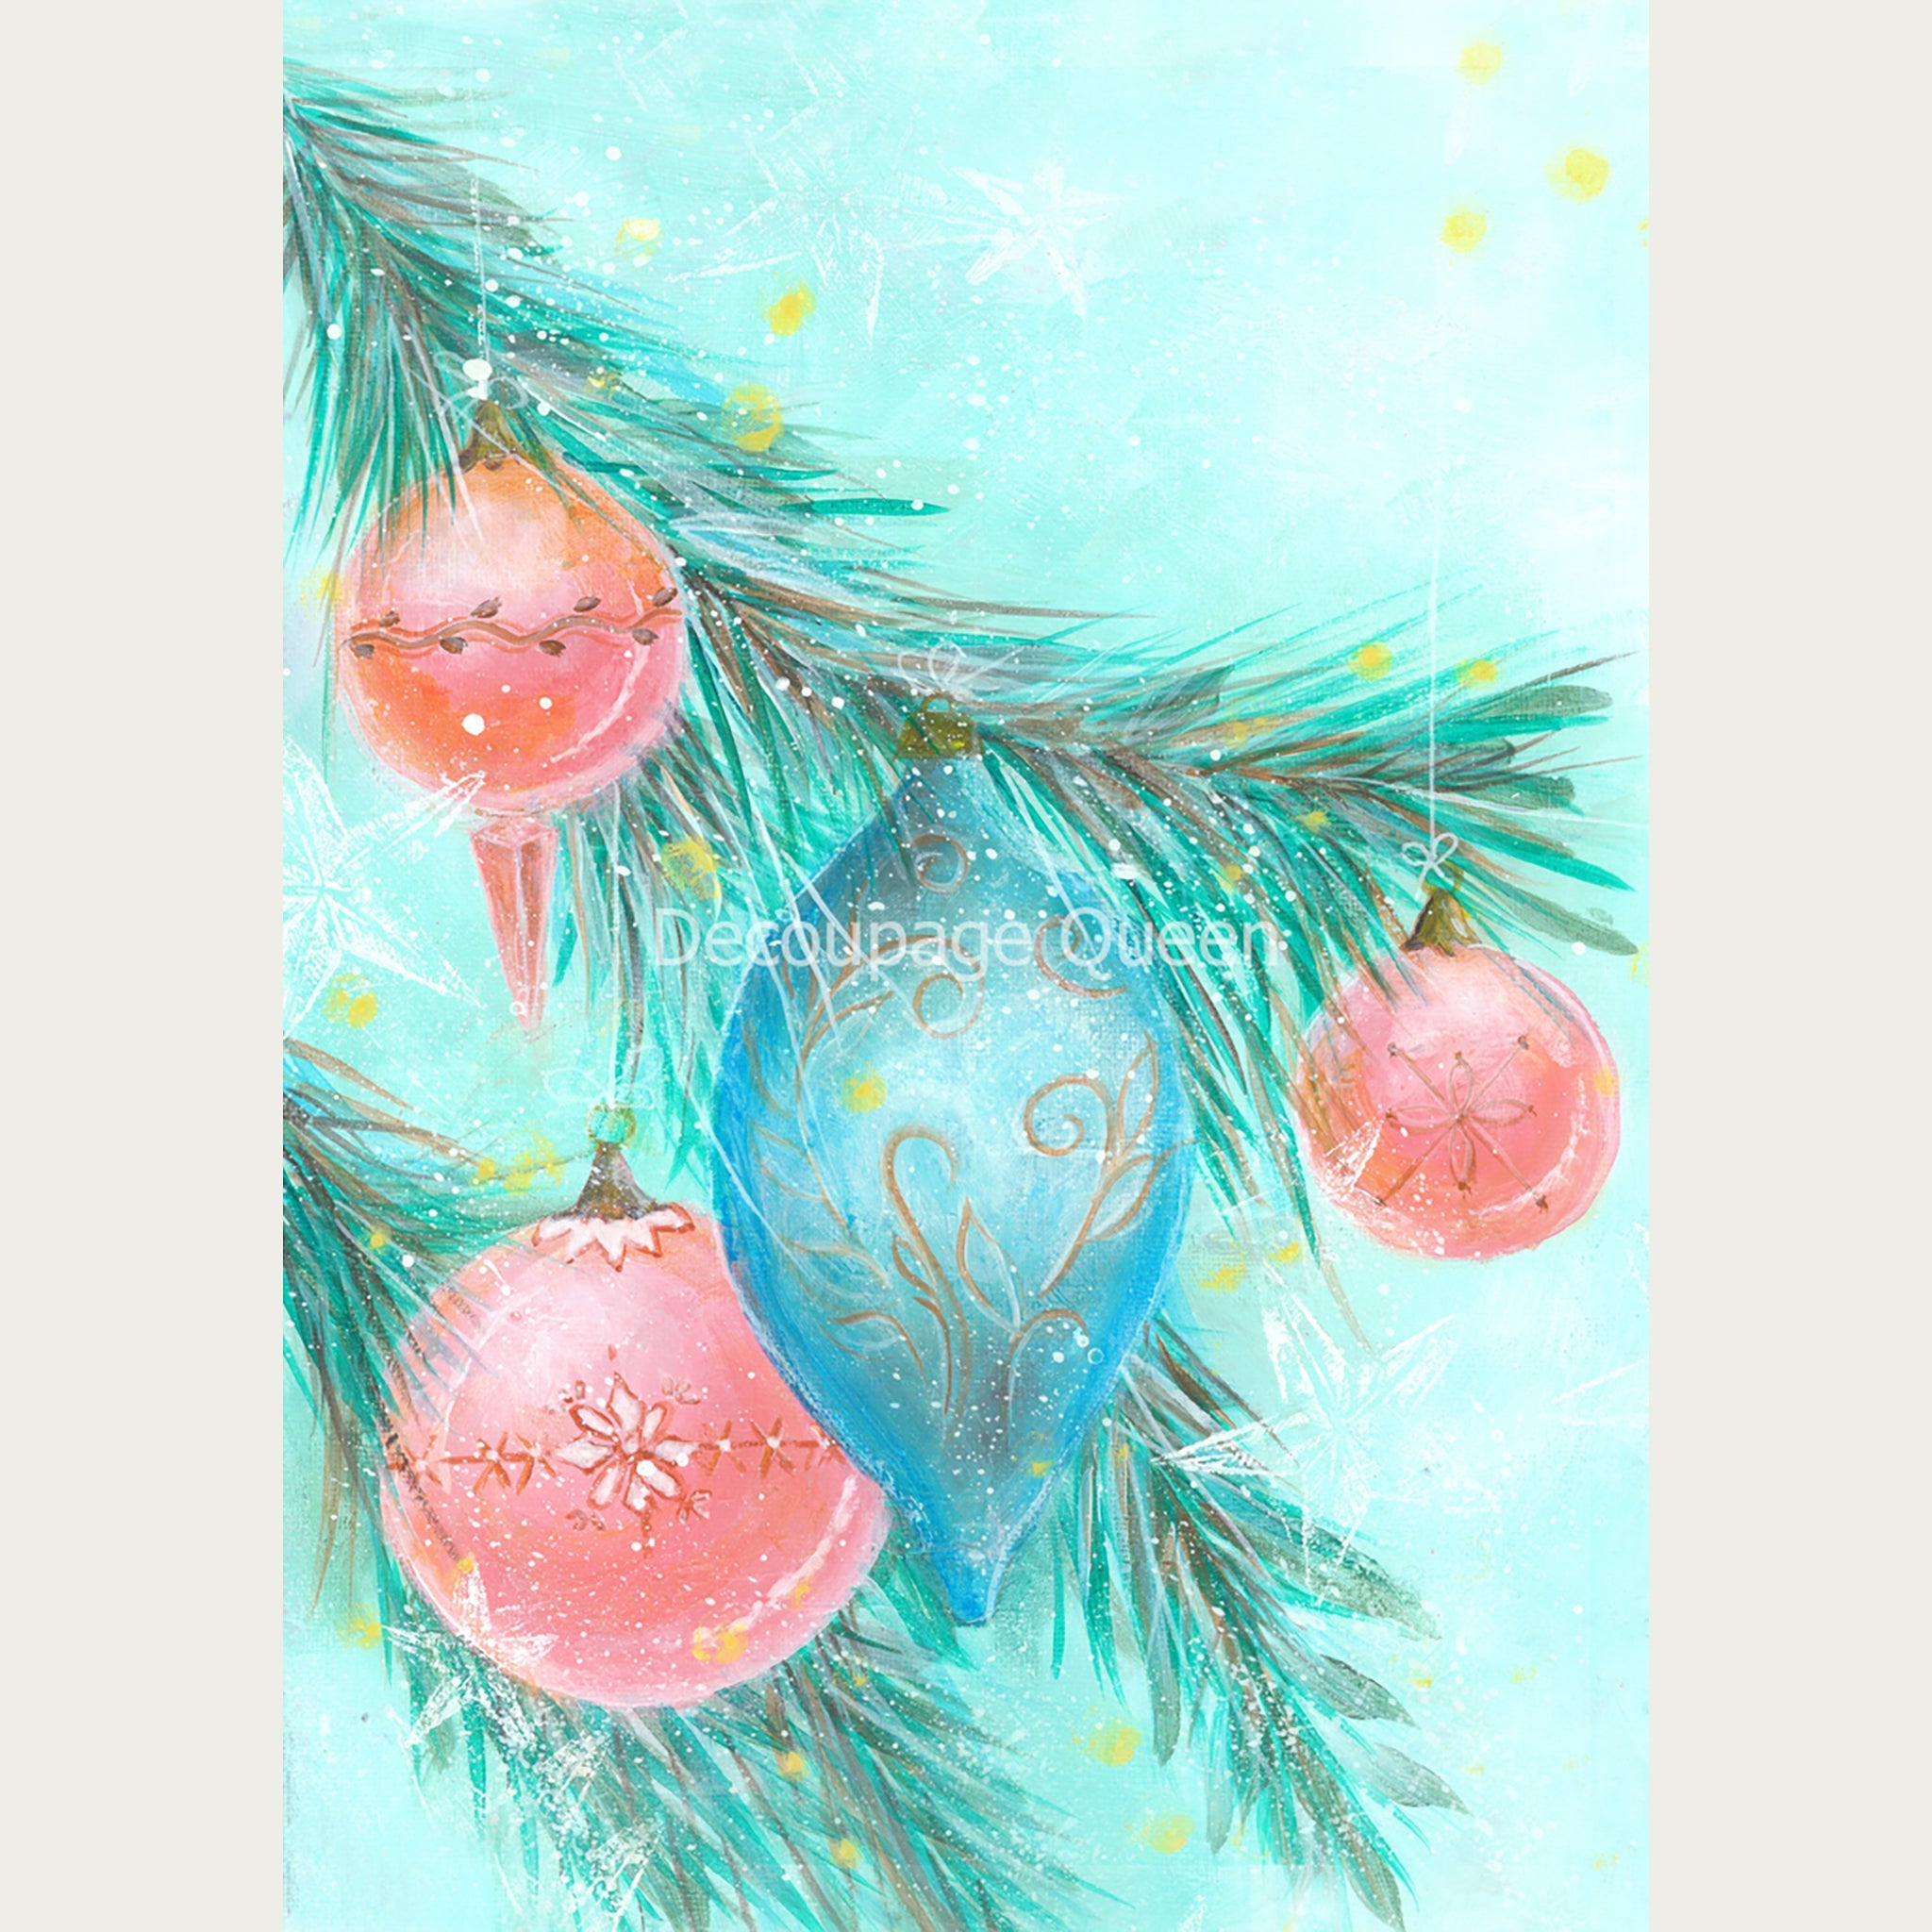 Hand painted style A2 rice paper design of pink and blue ornaments on a pine tree on a soft teal background. White borders on the sides.